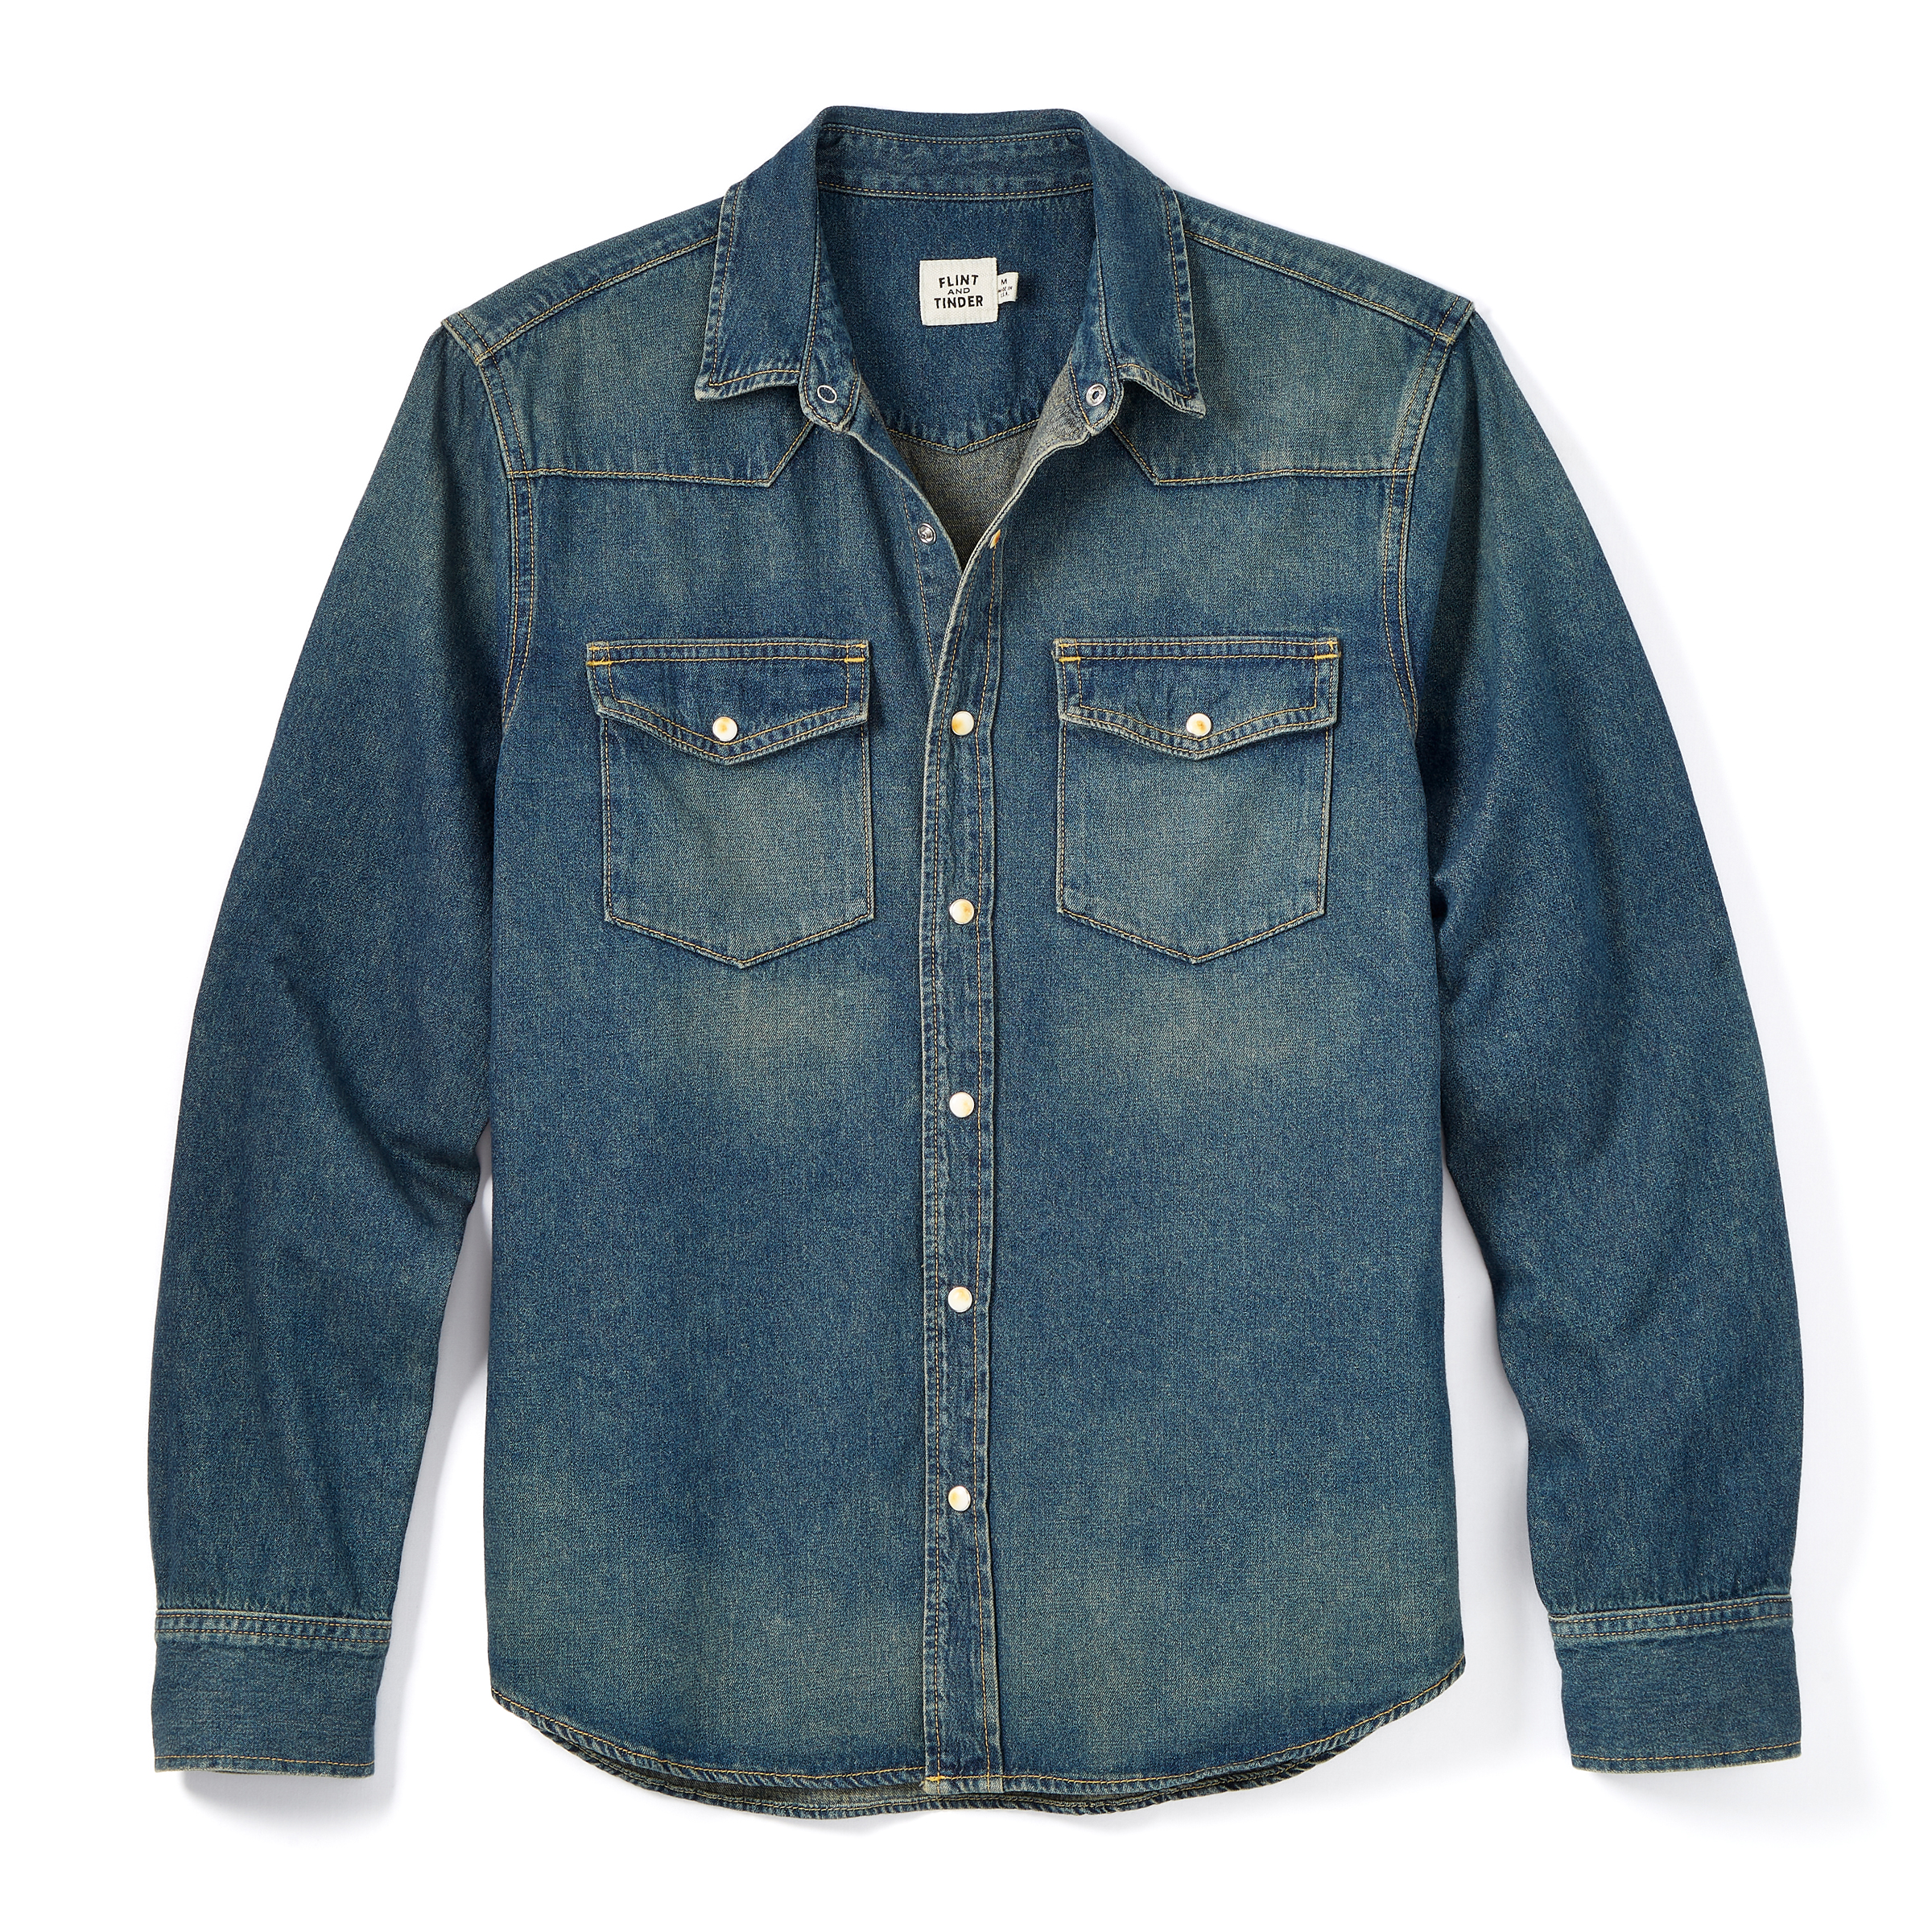 30 Best Men's Denim Shirts in 2023, According to Style Experts